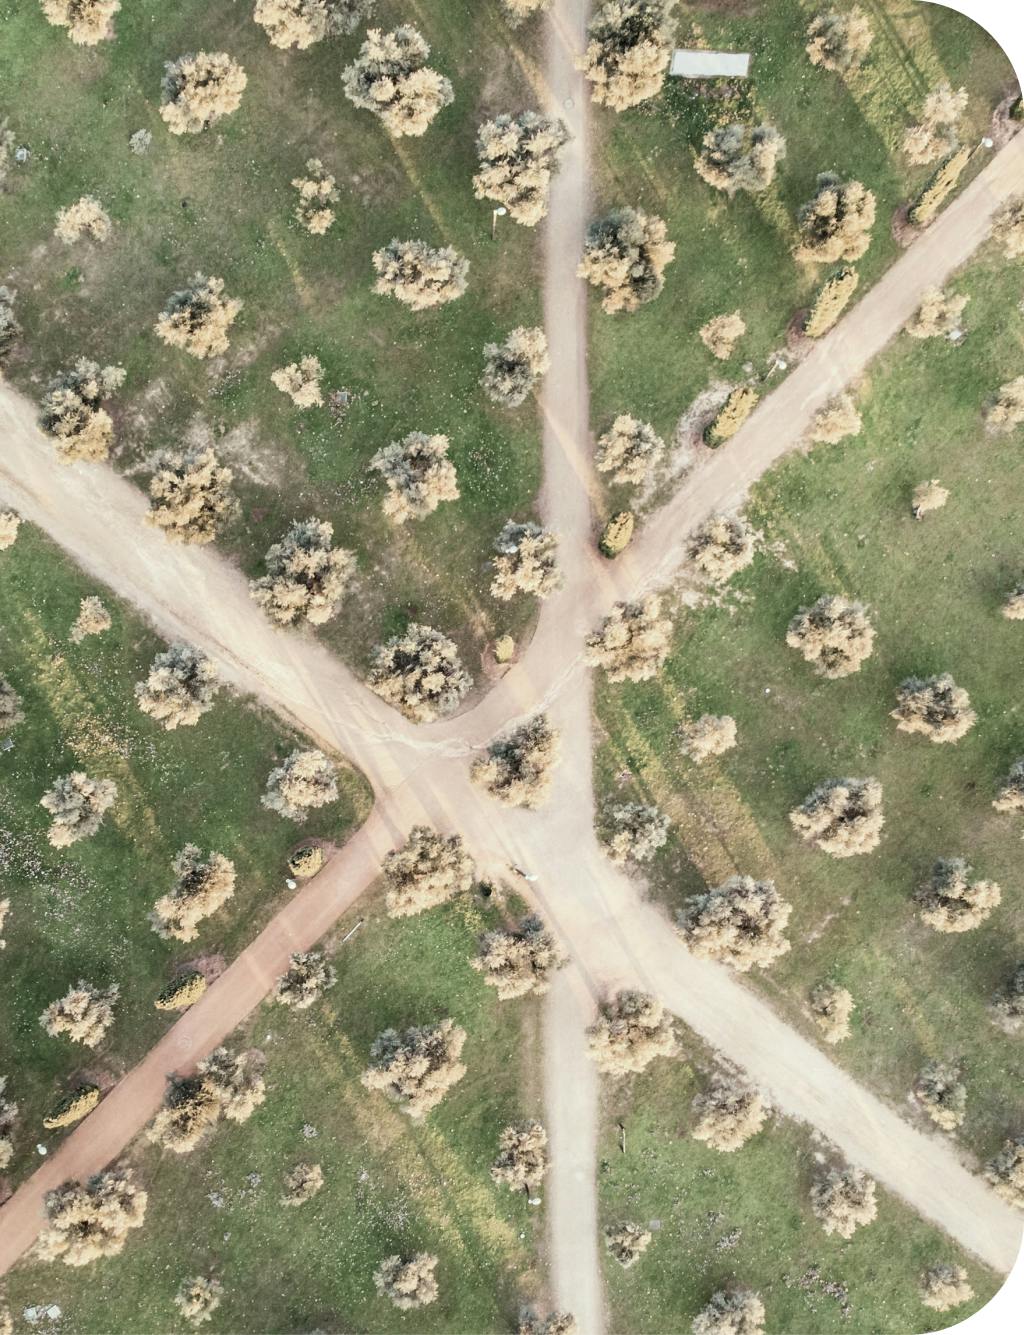 Image of some crossroads from the top.